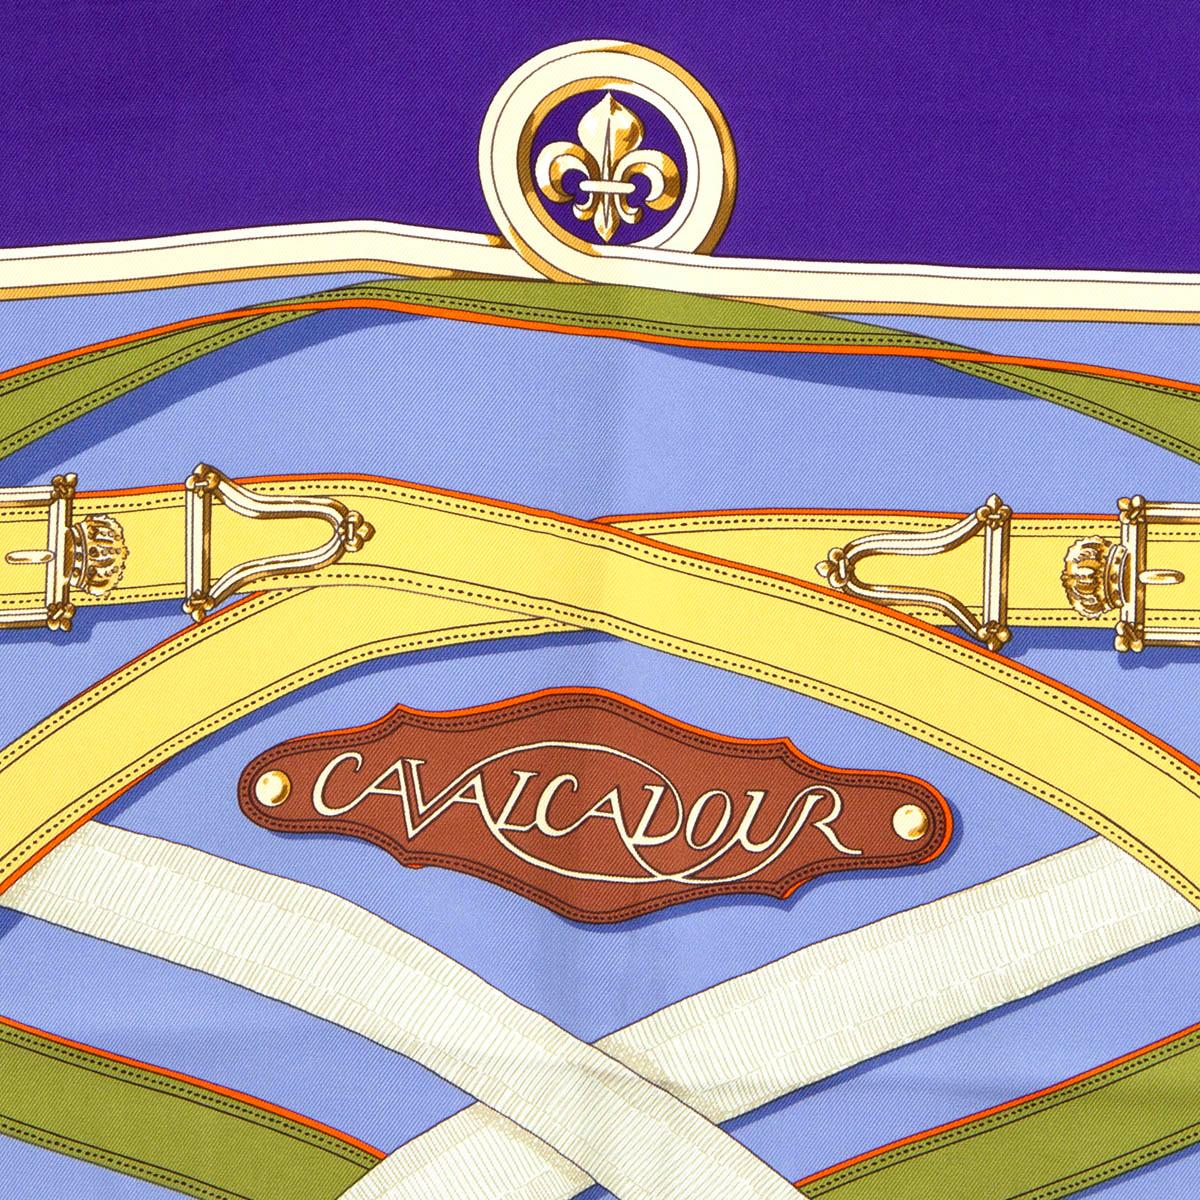 100% authentic Hermès 'Cavalcadour 90' scarf by Henri d'Origny in sky blue silk twill (100%) with purple border anda details in yellow, white, green, pink and brown. Has been worn and is in excellent condition.

Issued in 2011

Story